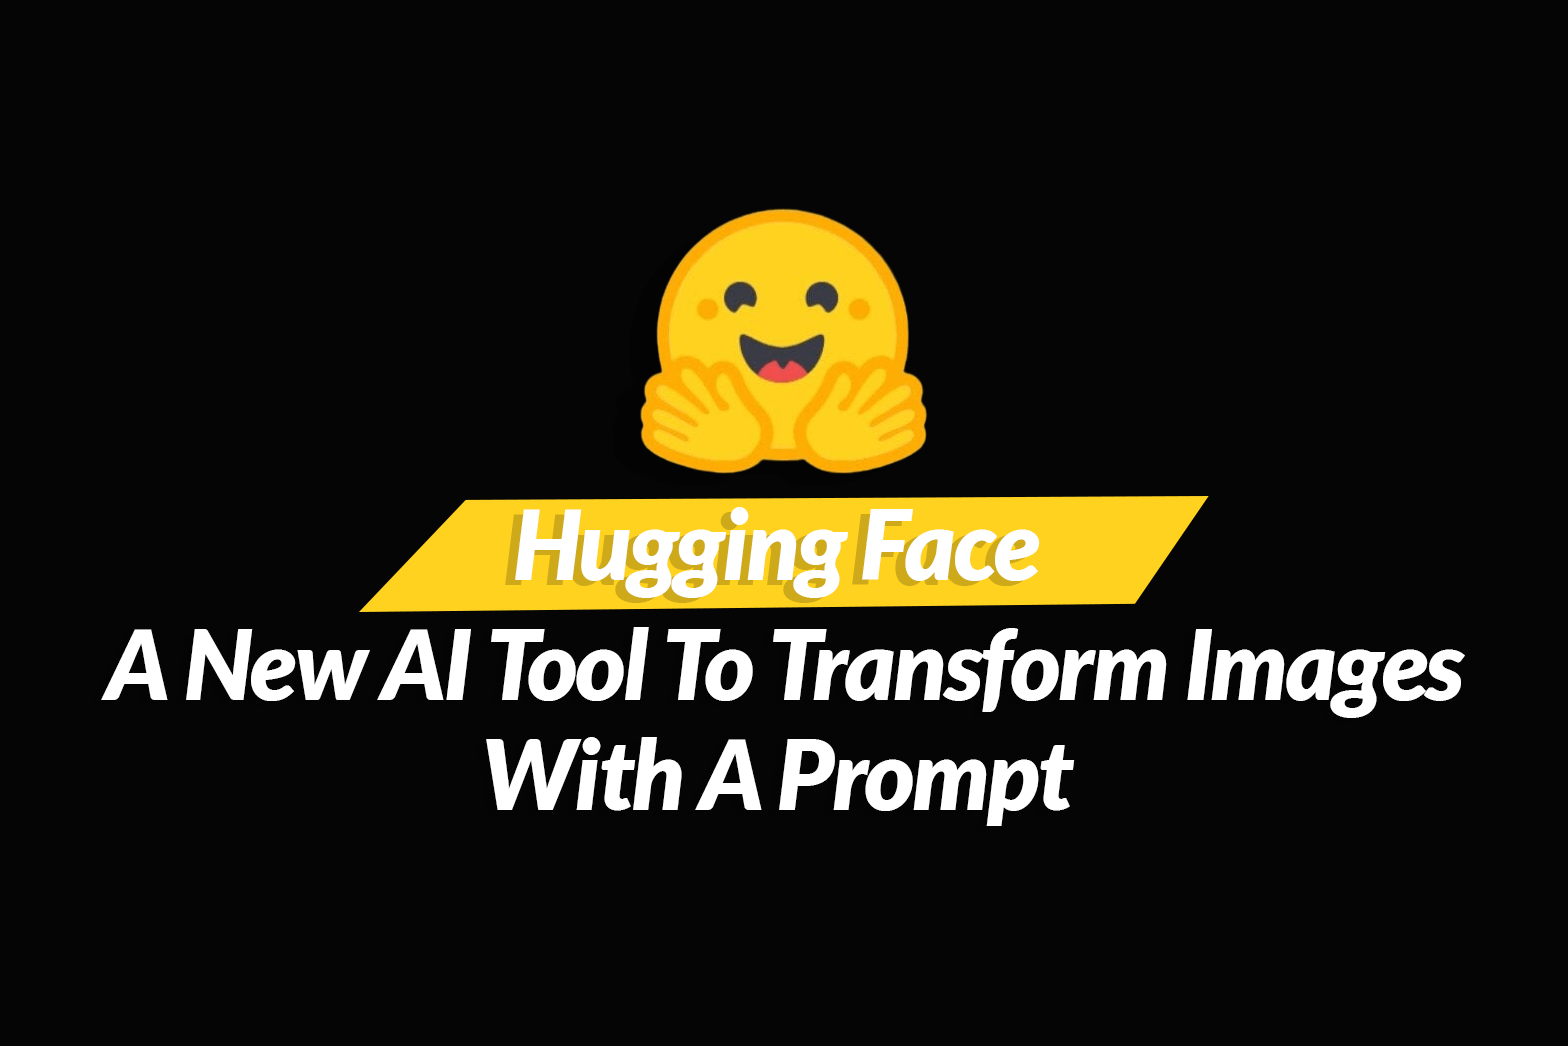 Hugging Face: A New AI Tool To Transform Images With A Prompt